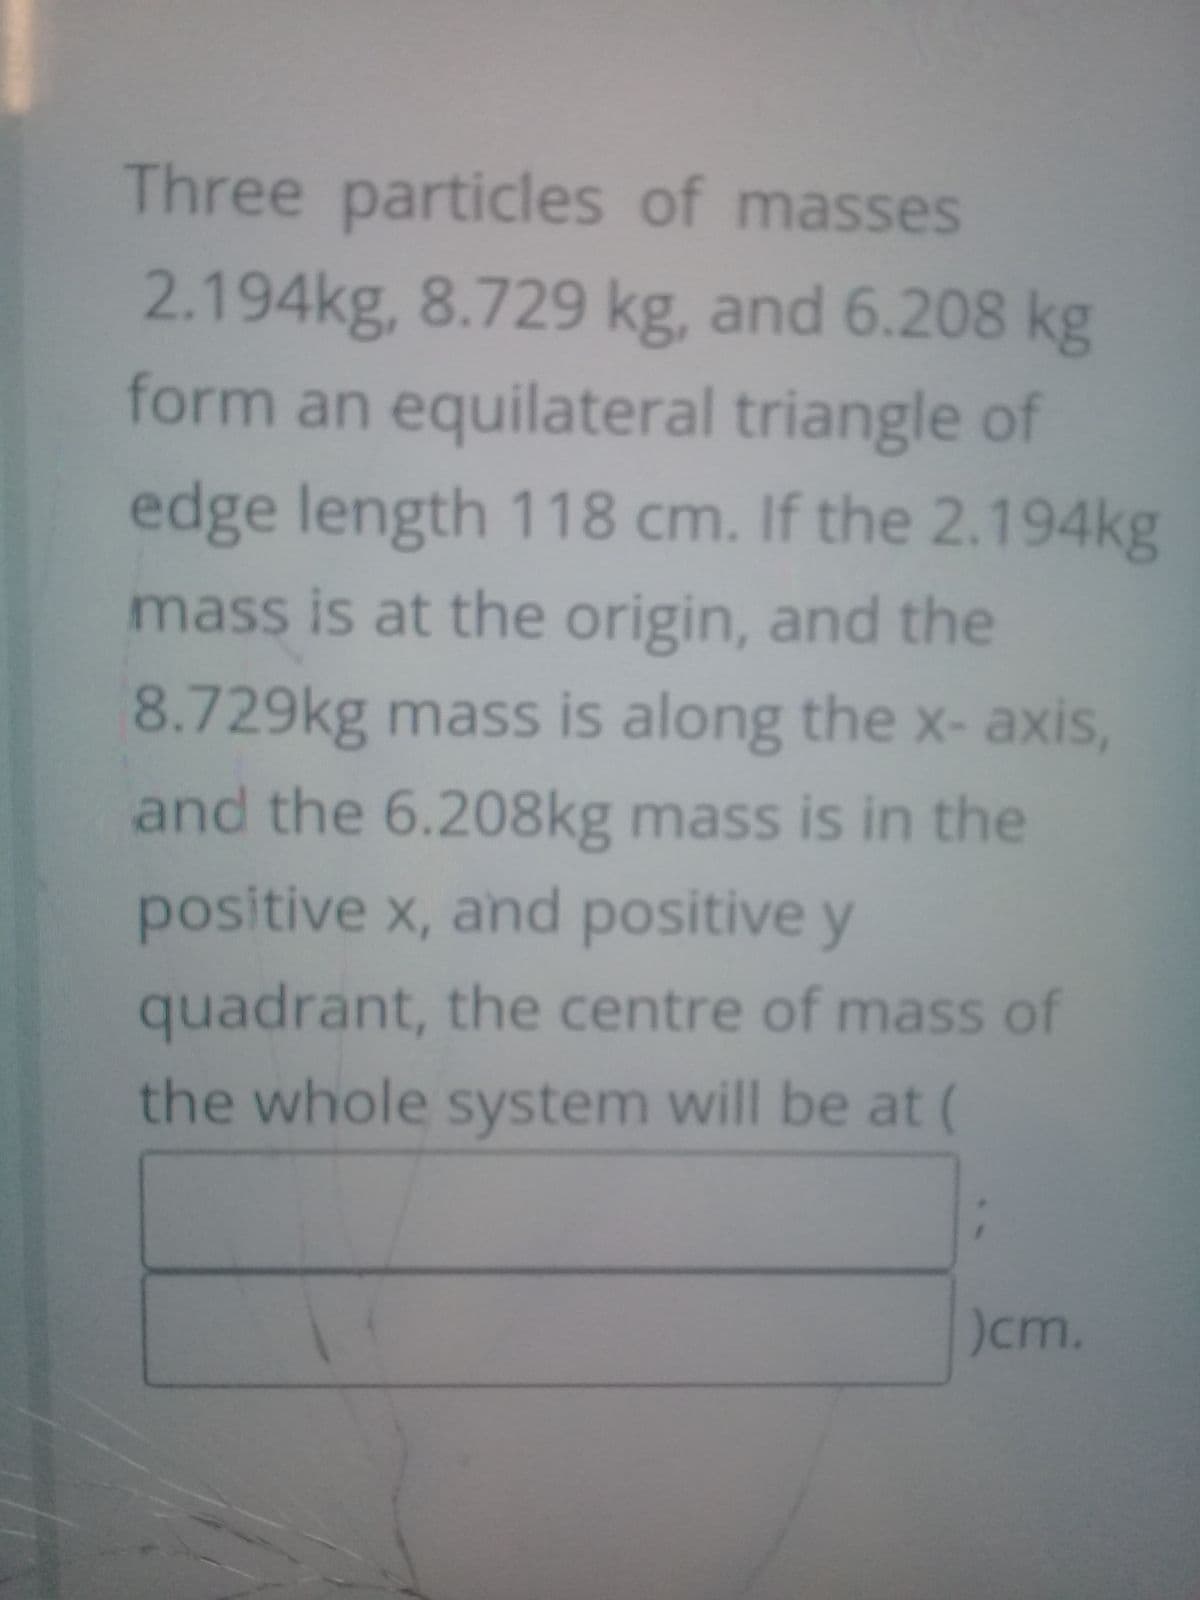 Three particles of masses
2.194kg, 8.729 kg, and 6.208 kg
form an equilateral triangle of
edge length 118 cm. If the 2.194kg
mass is at the origin, and the
8.729kg mass is along the x- axis,
and the 6.208kg mass is in the
positive x, and positive y
quadrant, the centre of mass of
the whole system will be at (
)cm.